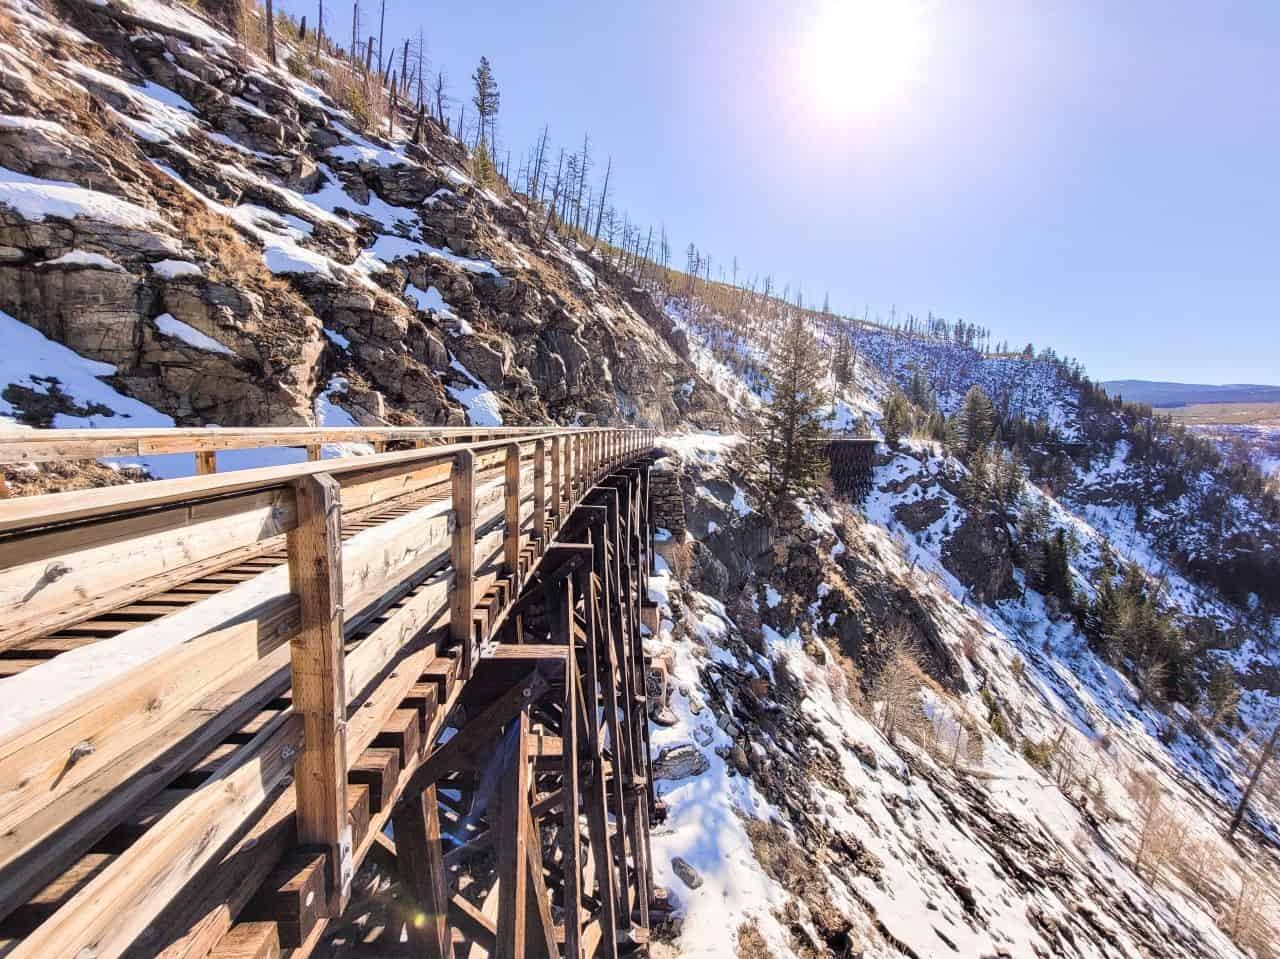 Spring Hiking Trails in British Columbia. Wooden train bridge lightly covered in snow